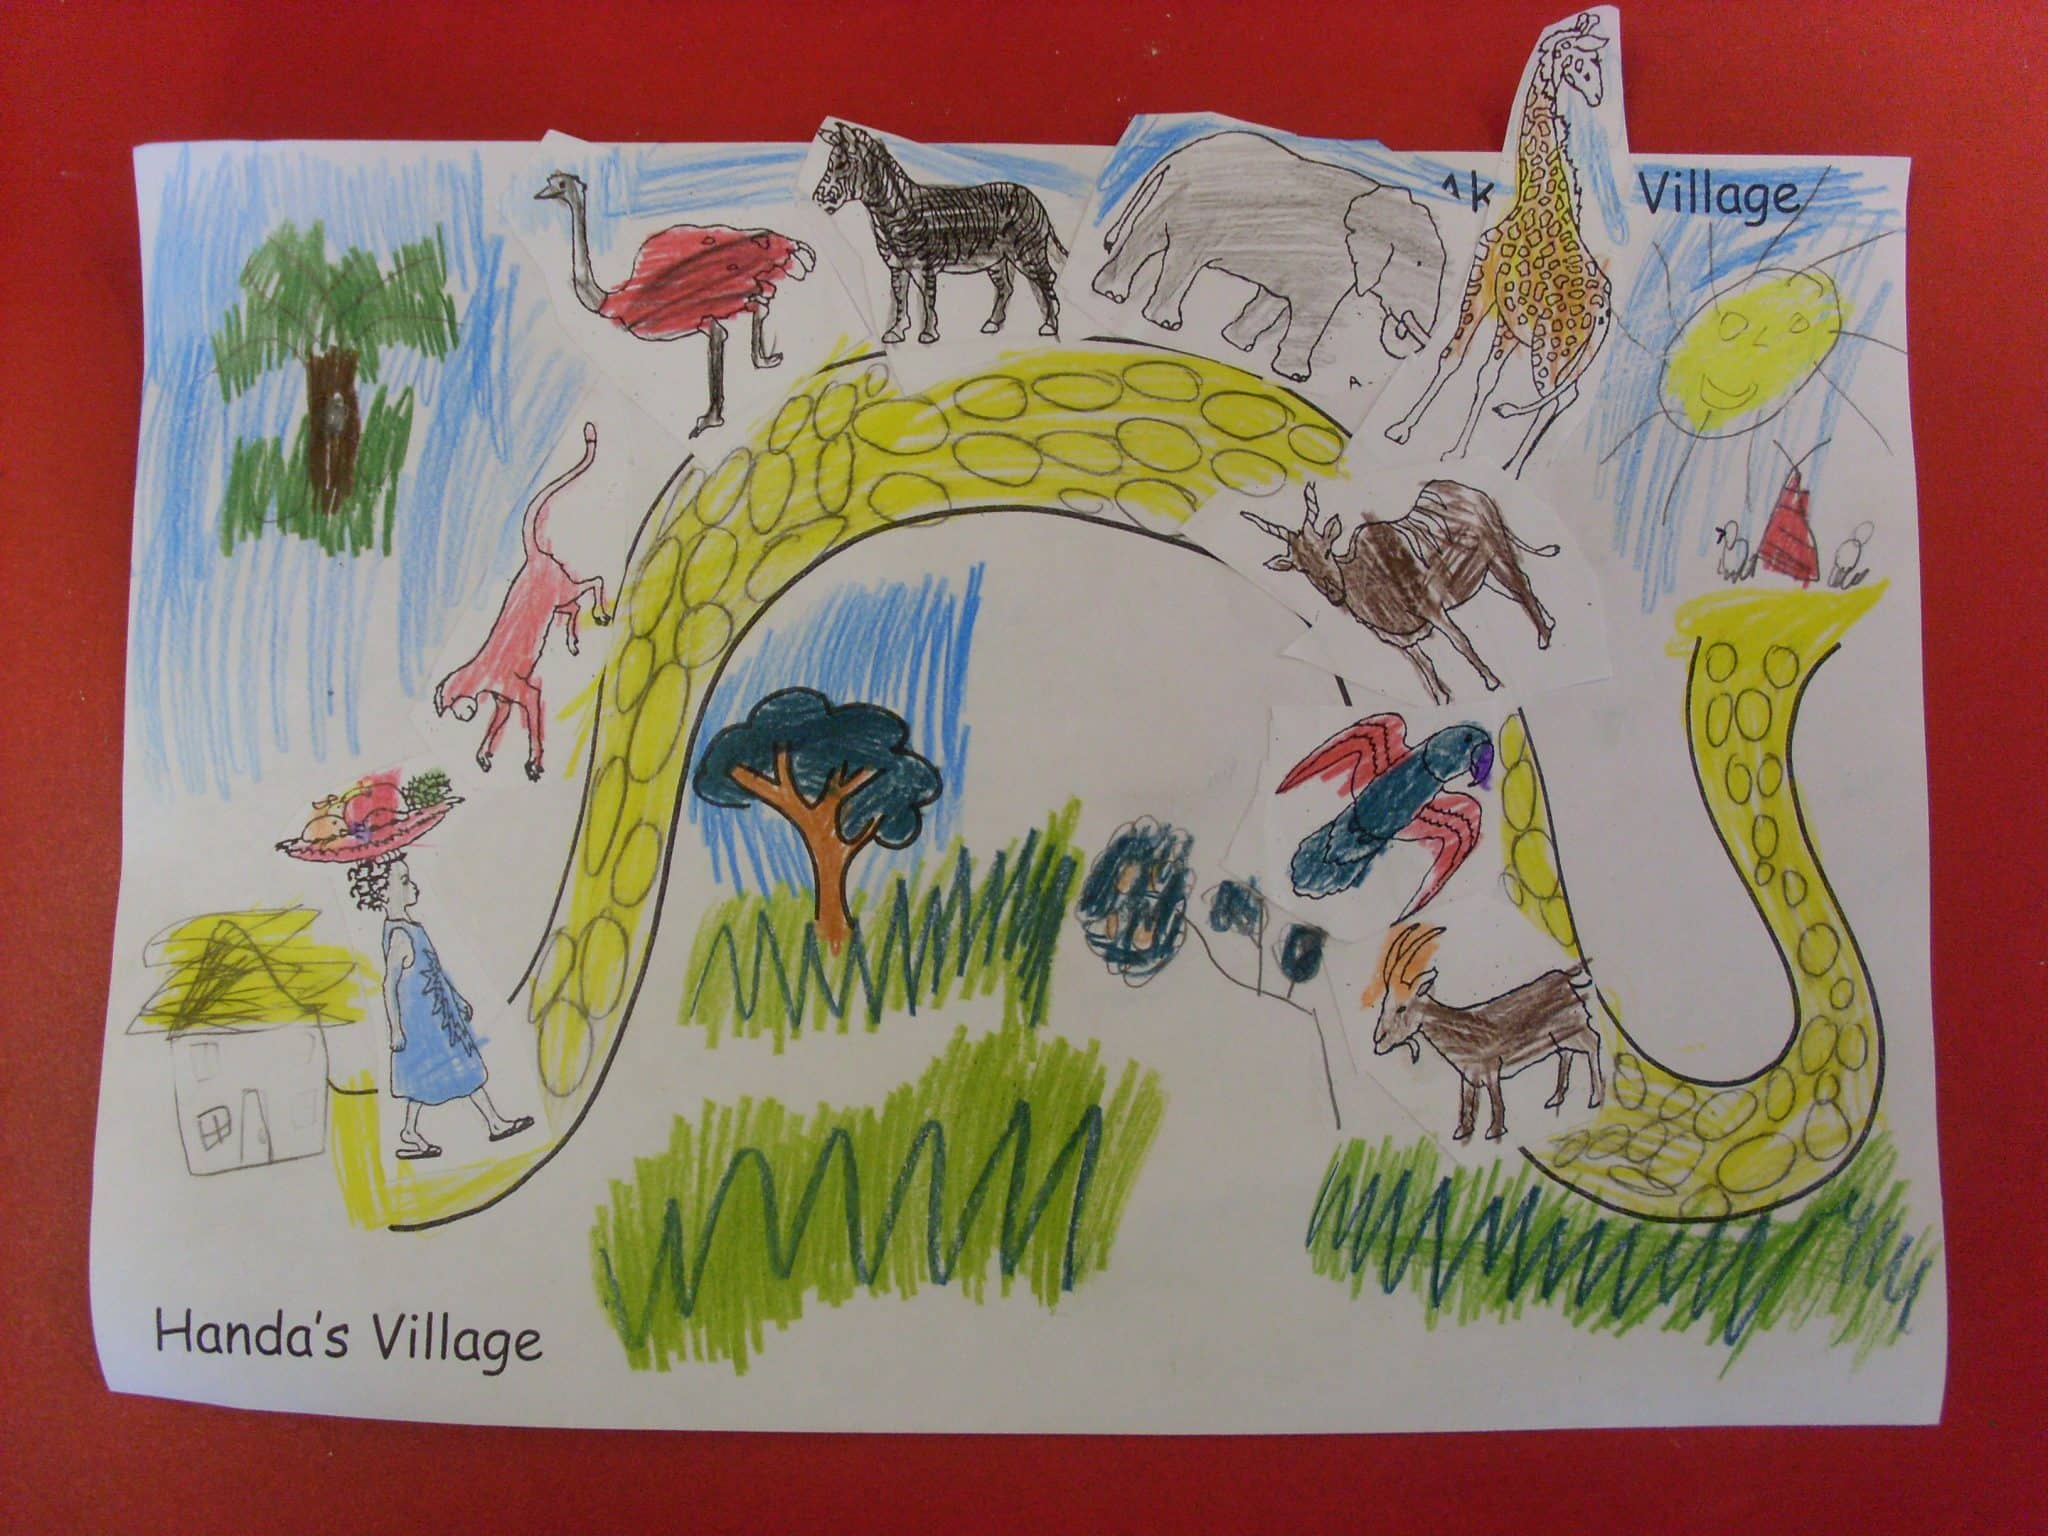 A child's drawing depicts a village bustling with animals and people, showcasing the art of storytelling through maps